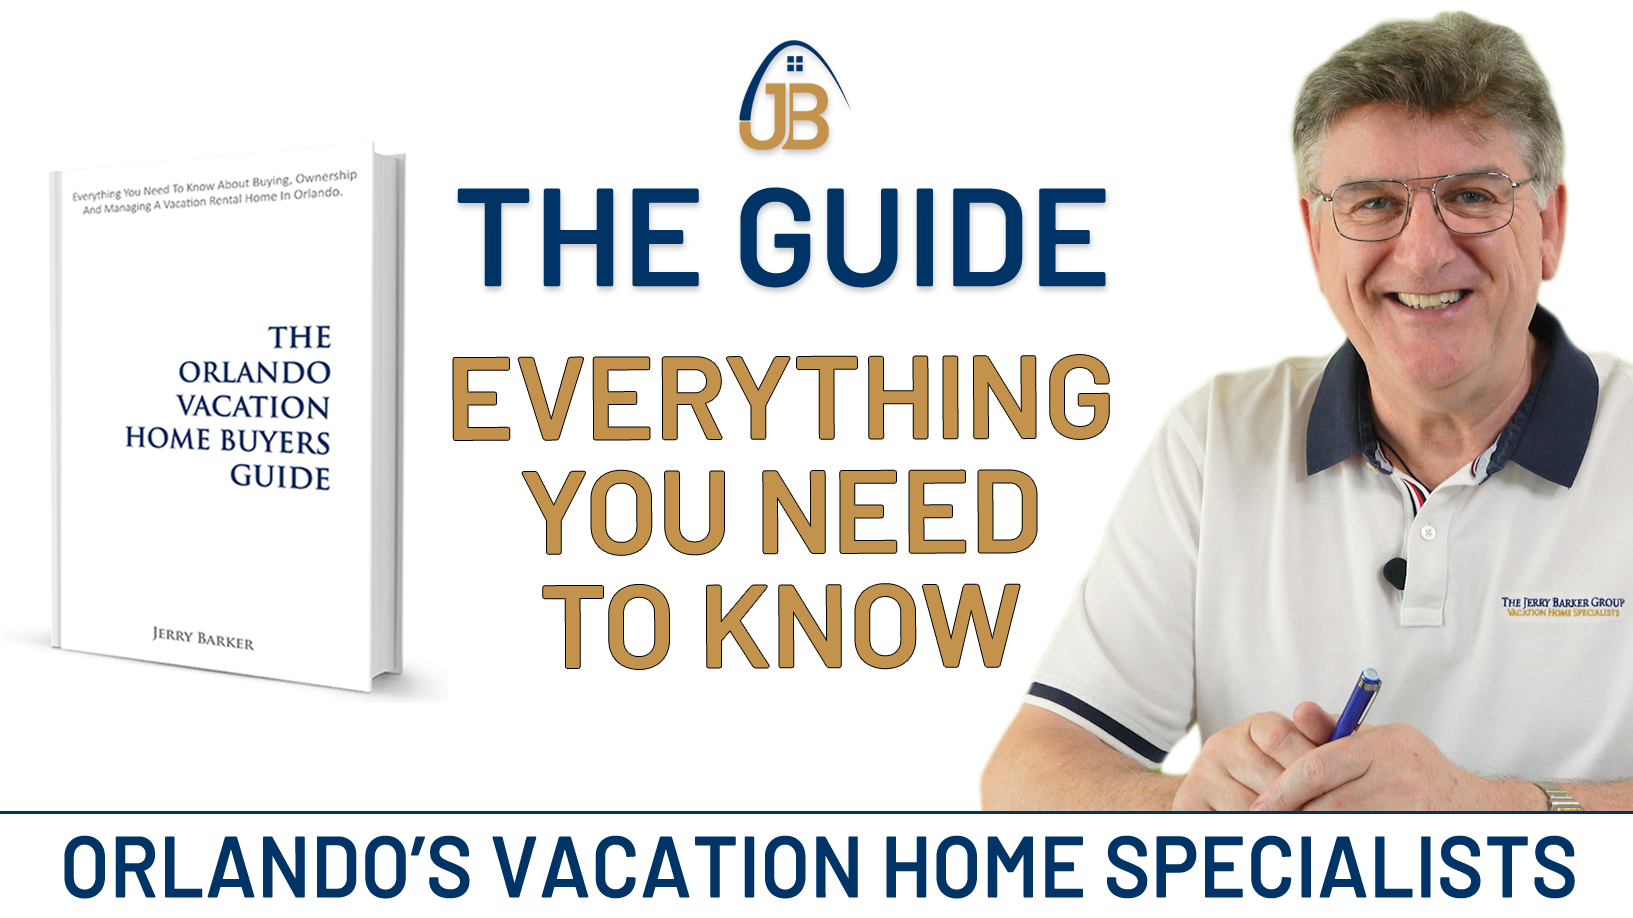 The Orlando Vacation Home Buyers Guide